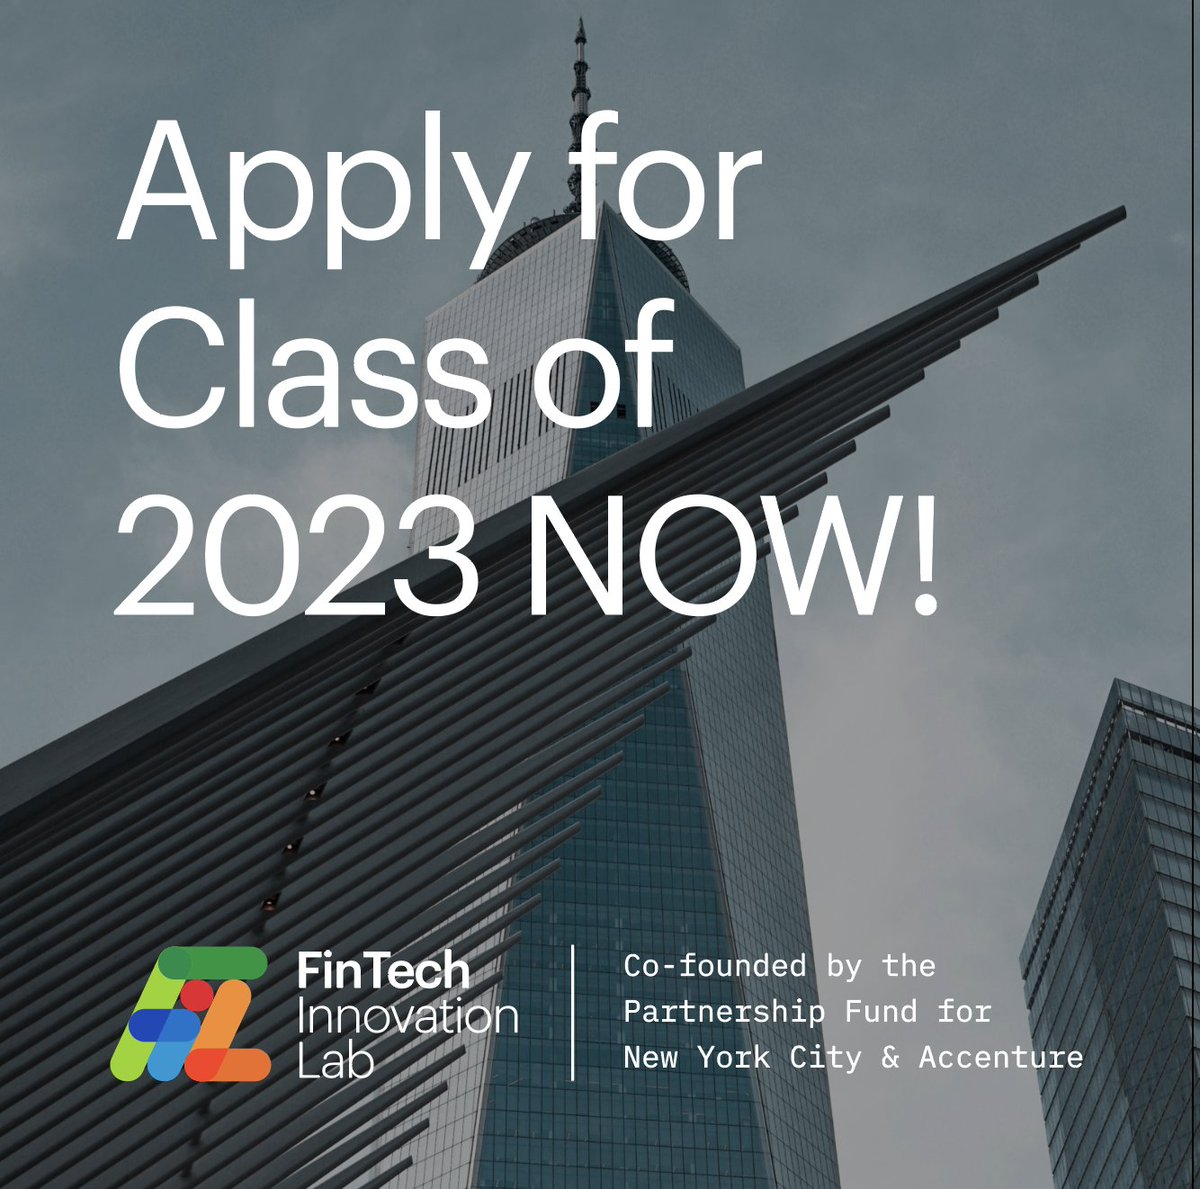 #Fintech and #Insurtech #startups, we want you! Applications for the Fintech Innovation Lab NY are open NOW through December 1st! Grow your business through mentorship from top financial institutions & take your start up to the next level. Apply Here: f6s.com/fintech-innova…